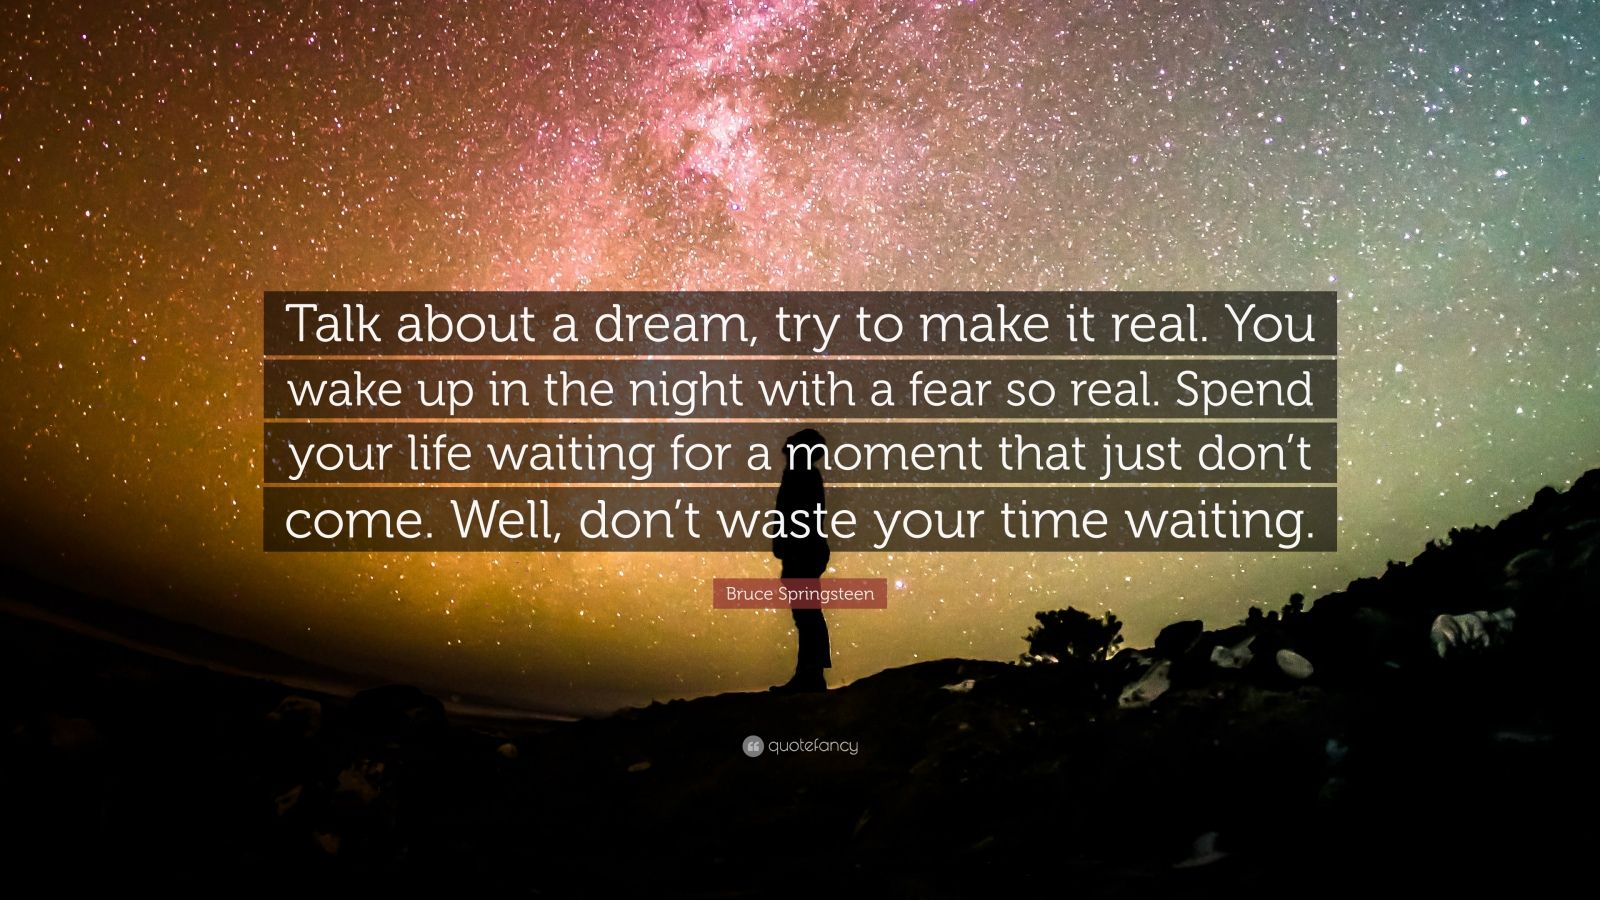 Bruce Springsteen Quote: “Talk about a dream, try to make it real. You